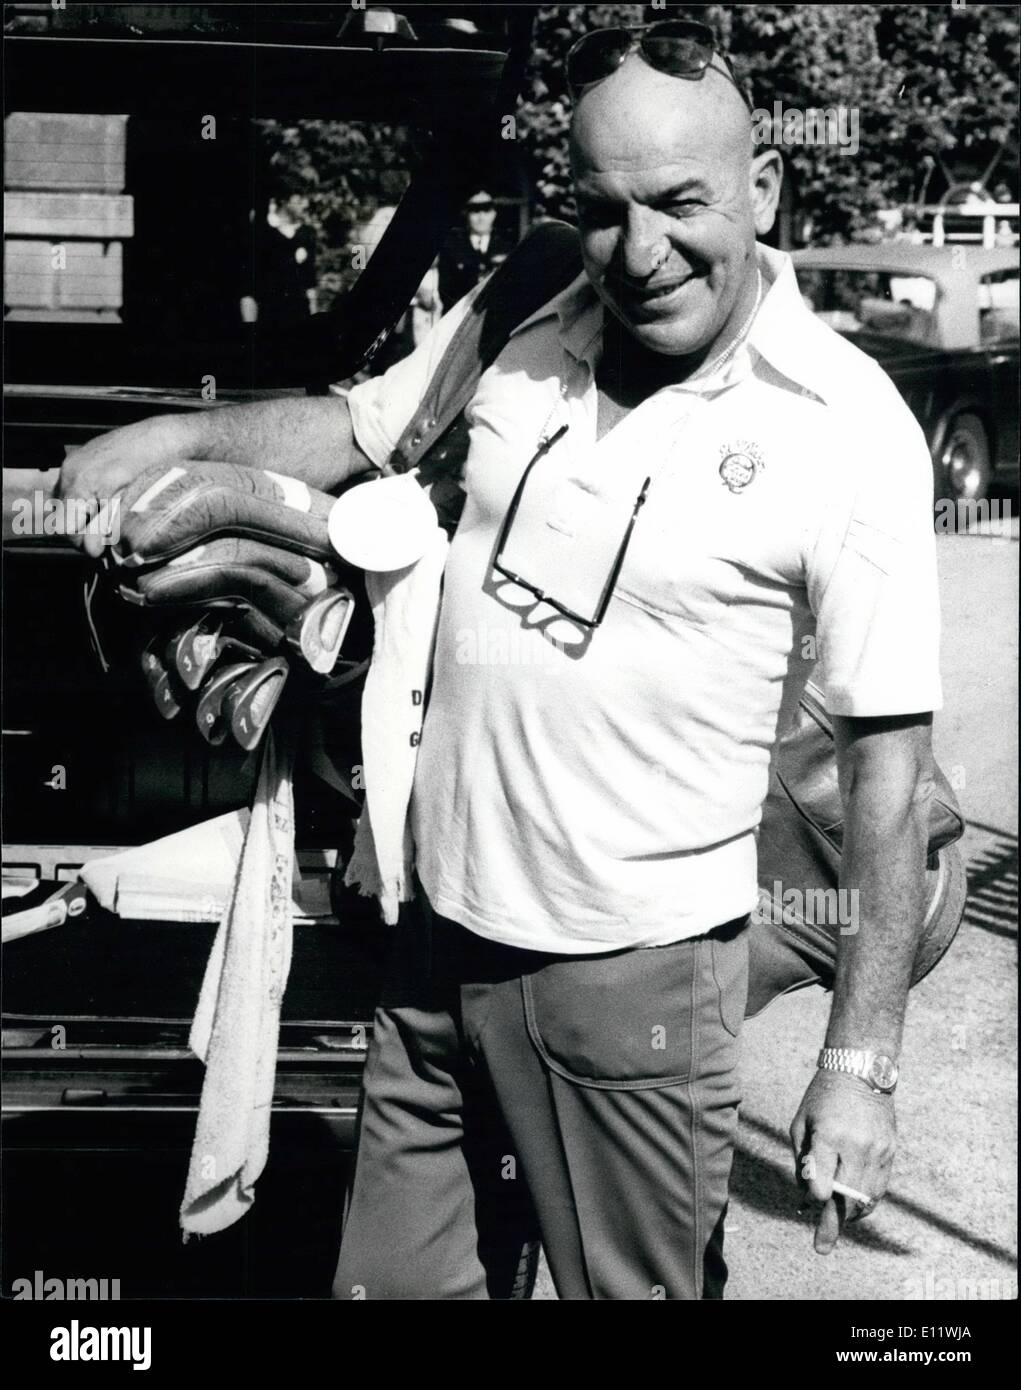 Sep. 09, 1980 - Golf and Showbiz Celebrates Practice for the Bob Hope British Classic Golf Pro-am at Epson. Photo Shows Telly Savalas of Kojak Fame, seen as he arrives at the R.A.C. Country Club, Epson, to Practice for tomorrow Bob Hope Classic. Stock Photo